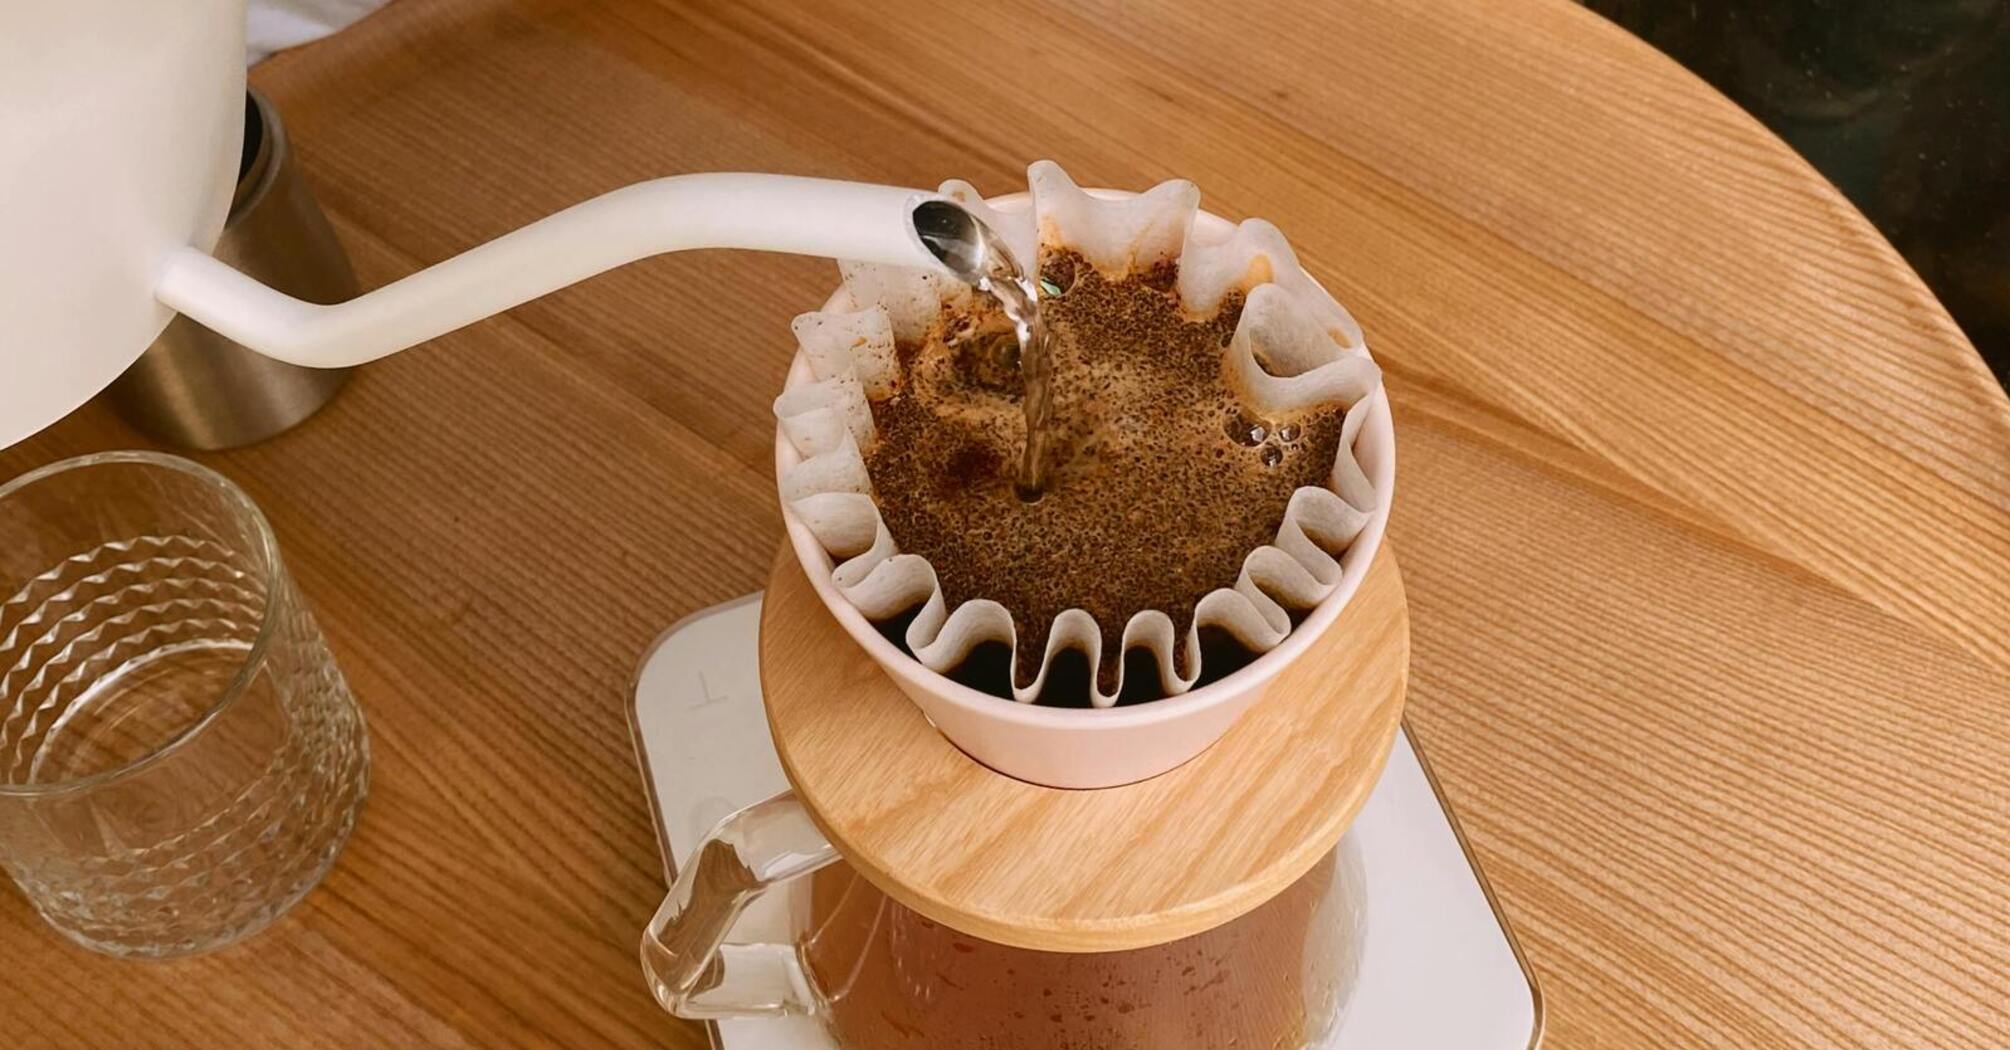 How to make coffee taste better